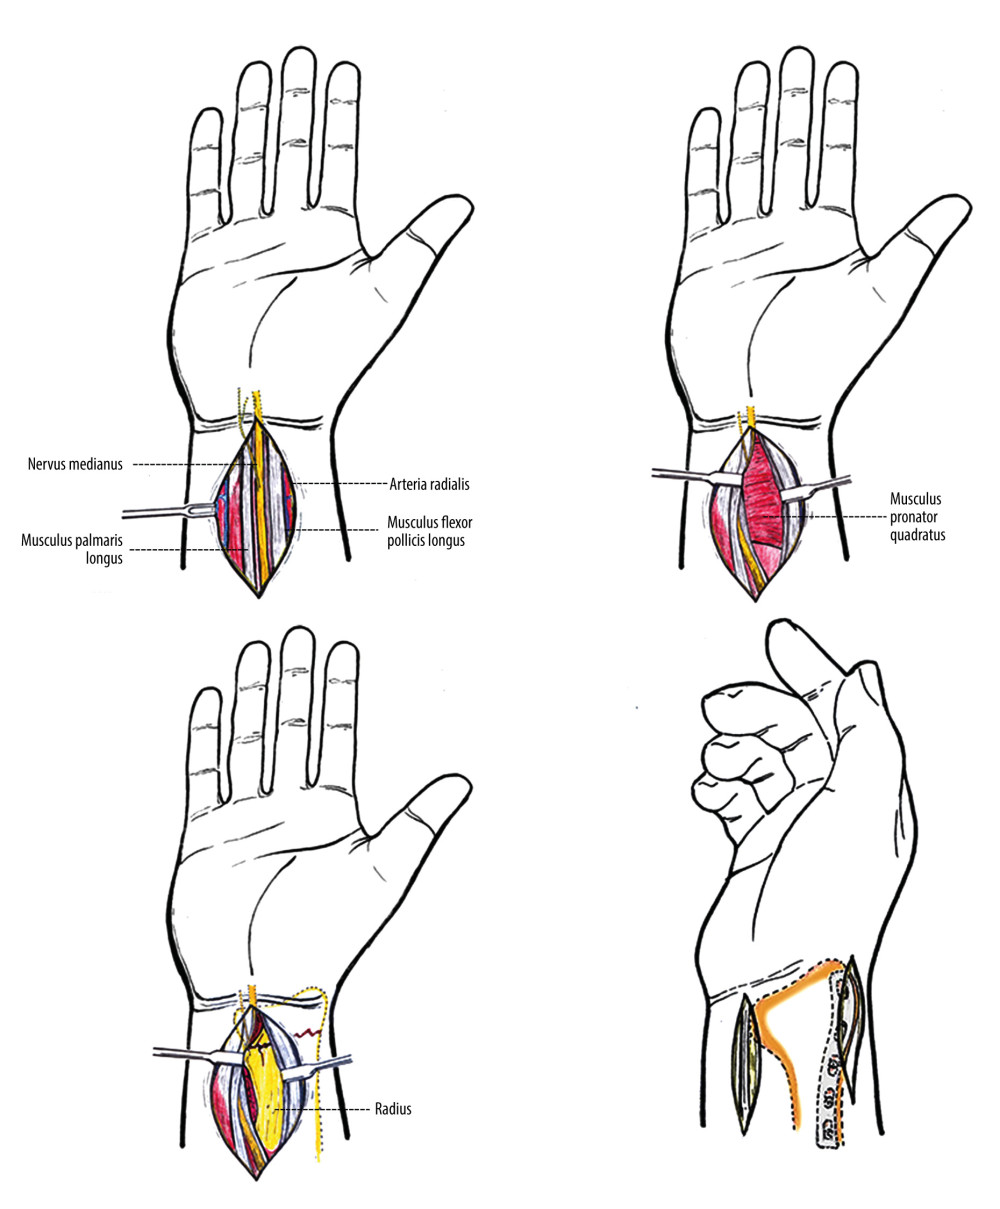 Diagram for distal radius fracture surgery. The medial approach and radial auxiliary approach were used.